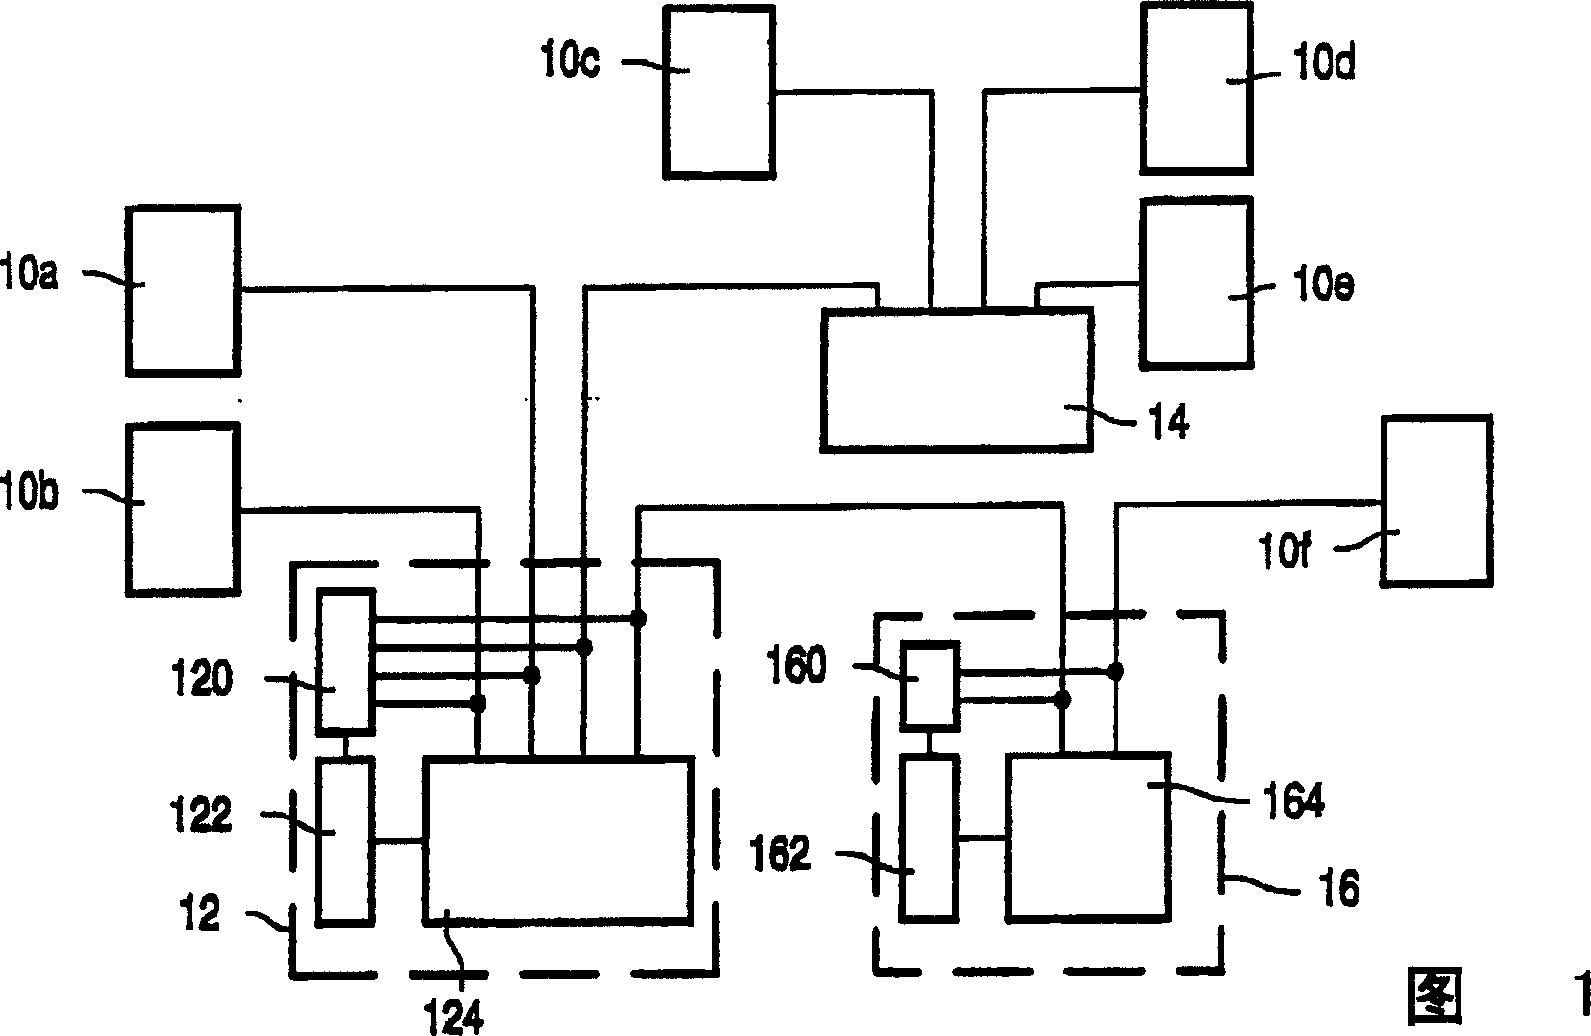 Communication bus system operable in a sleep mode and a normal mode